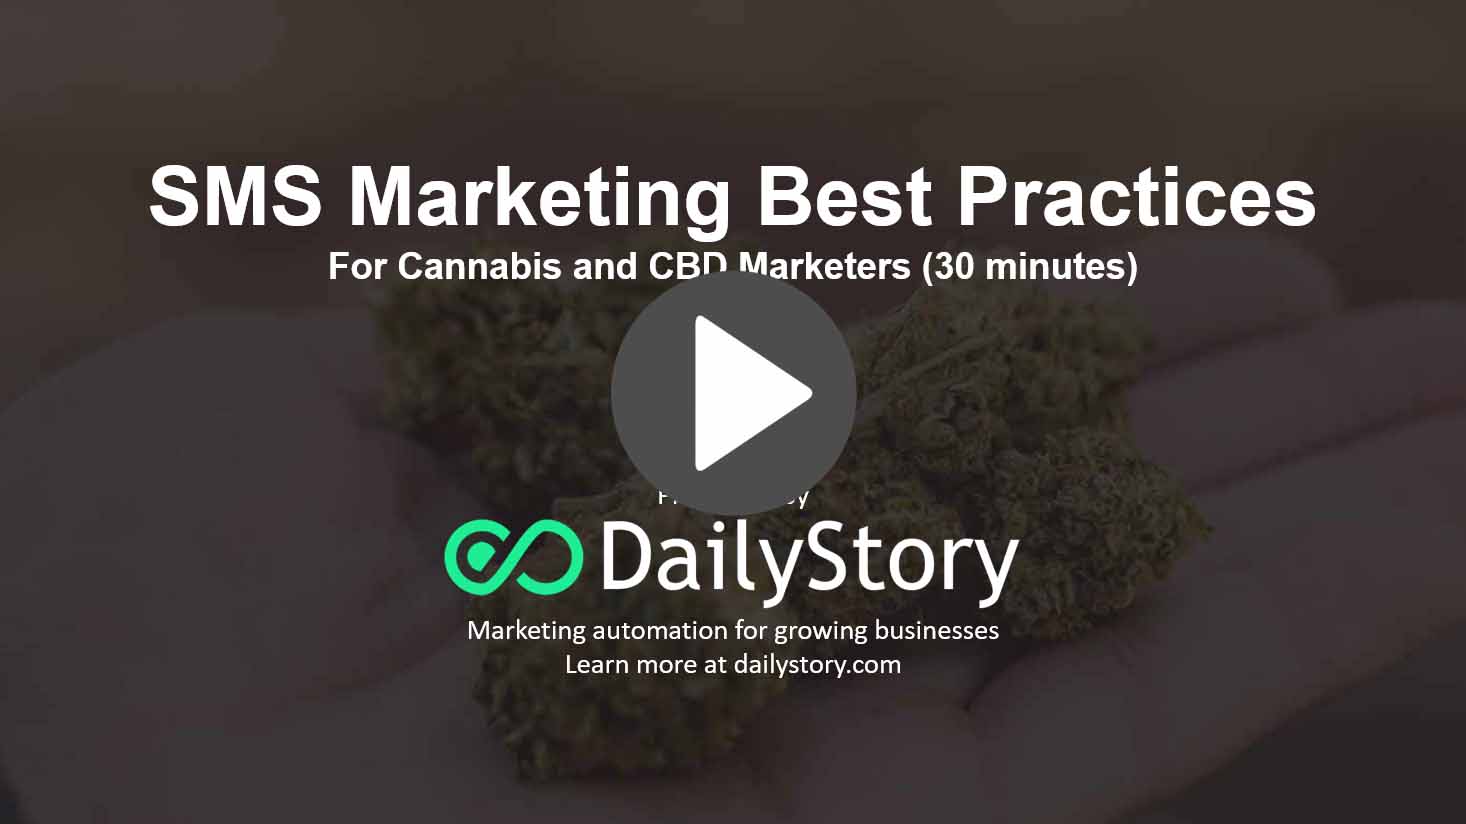 SMS Marketing Best Practices for Cannabis and CBD Marketers